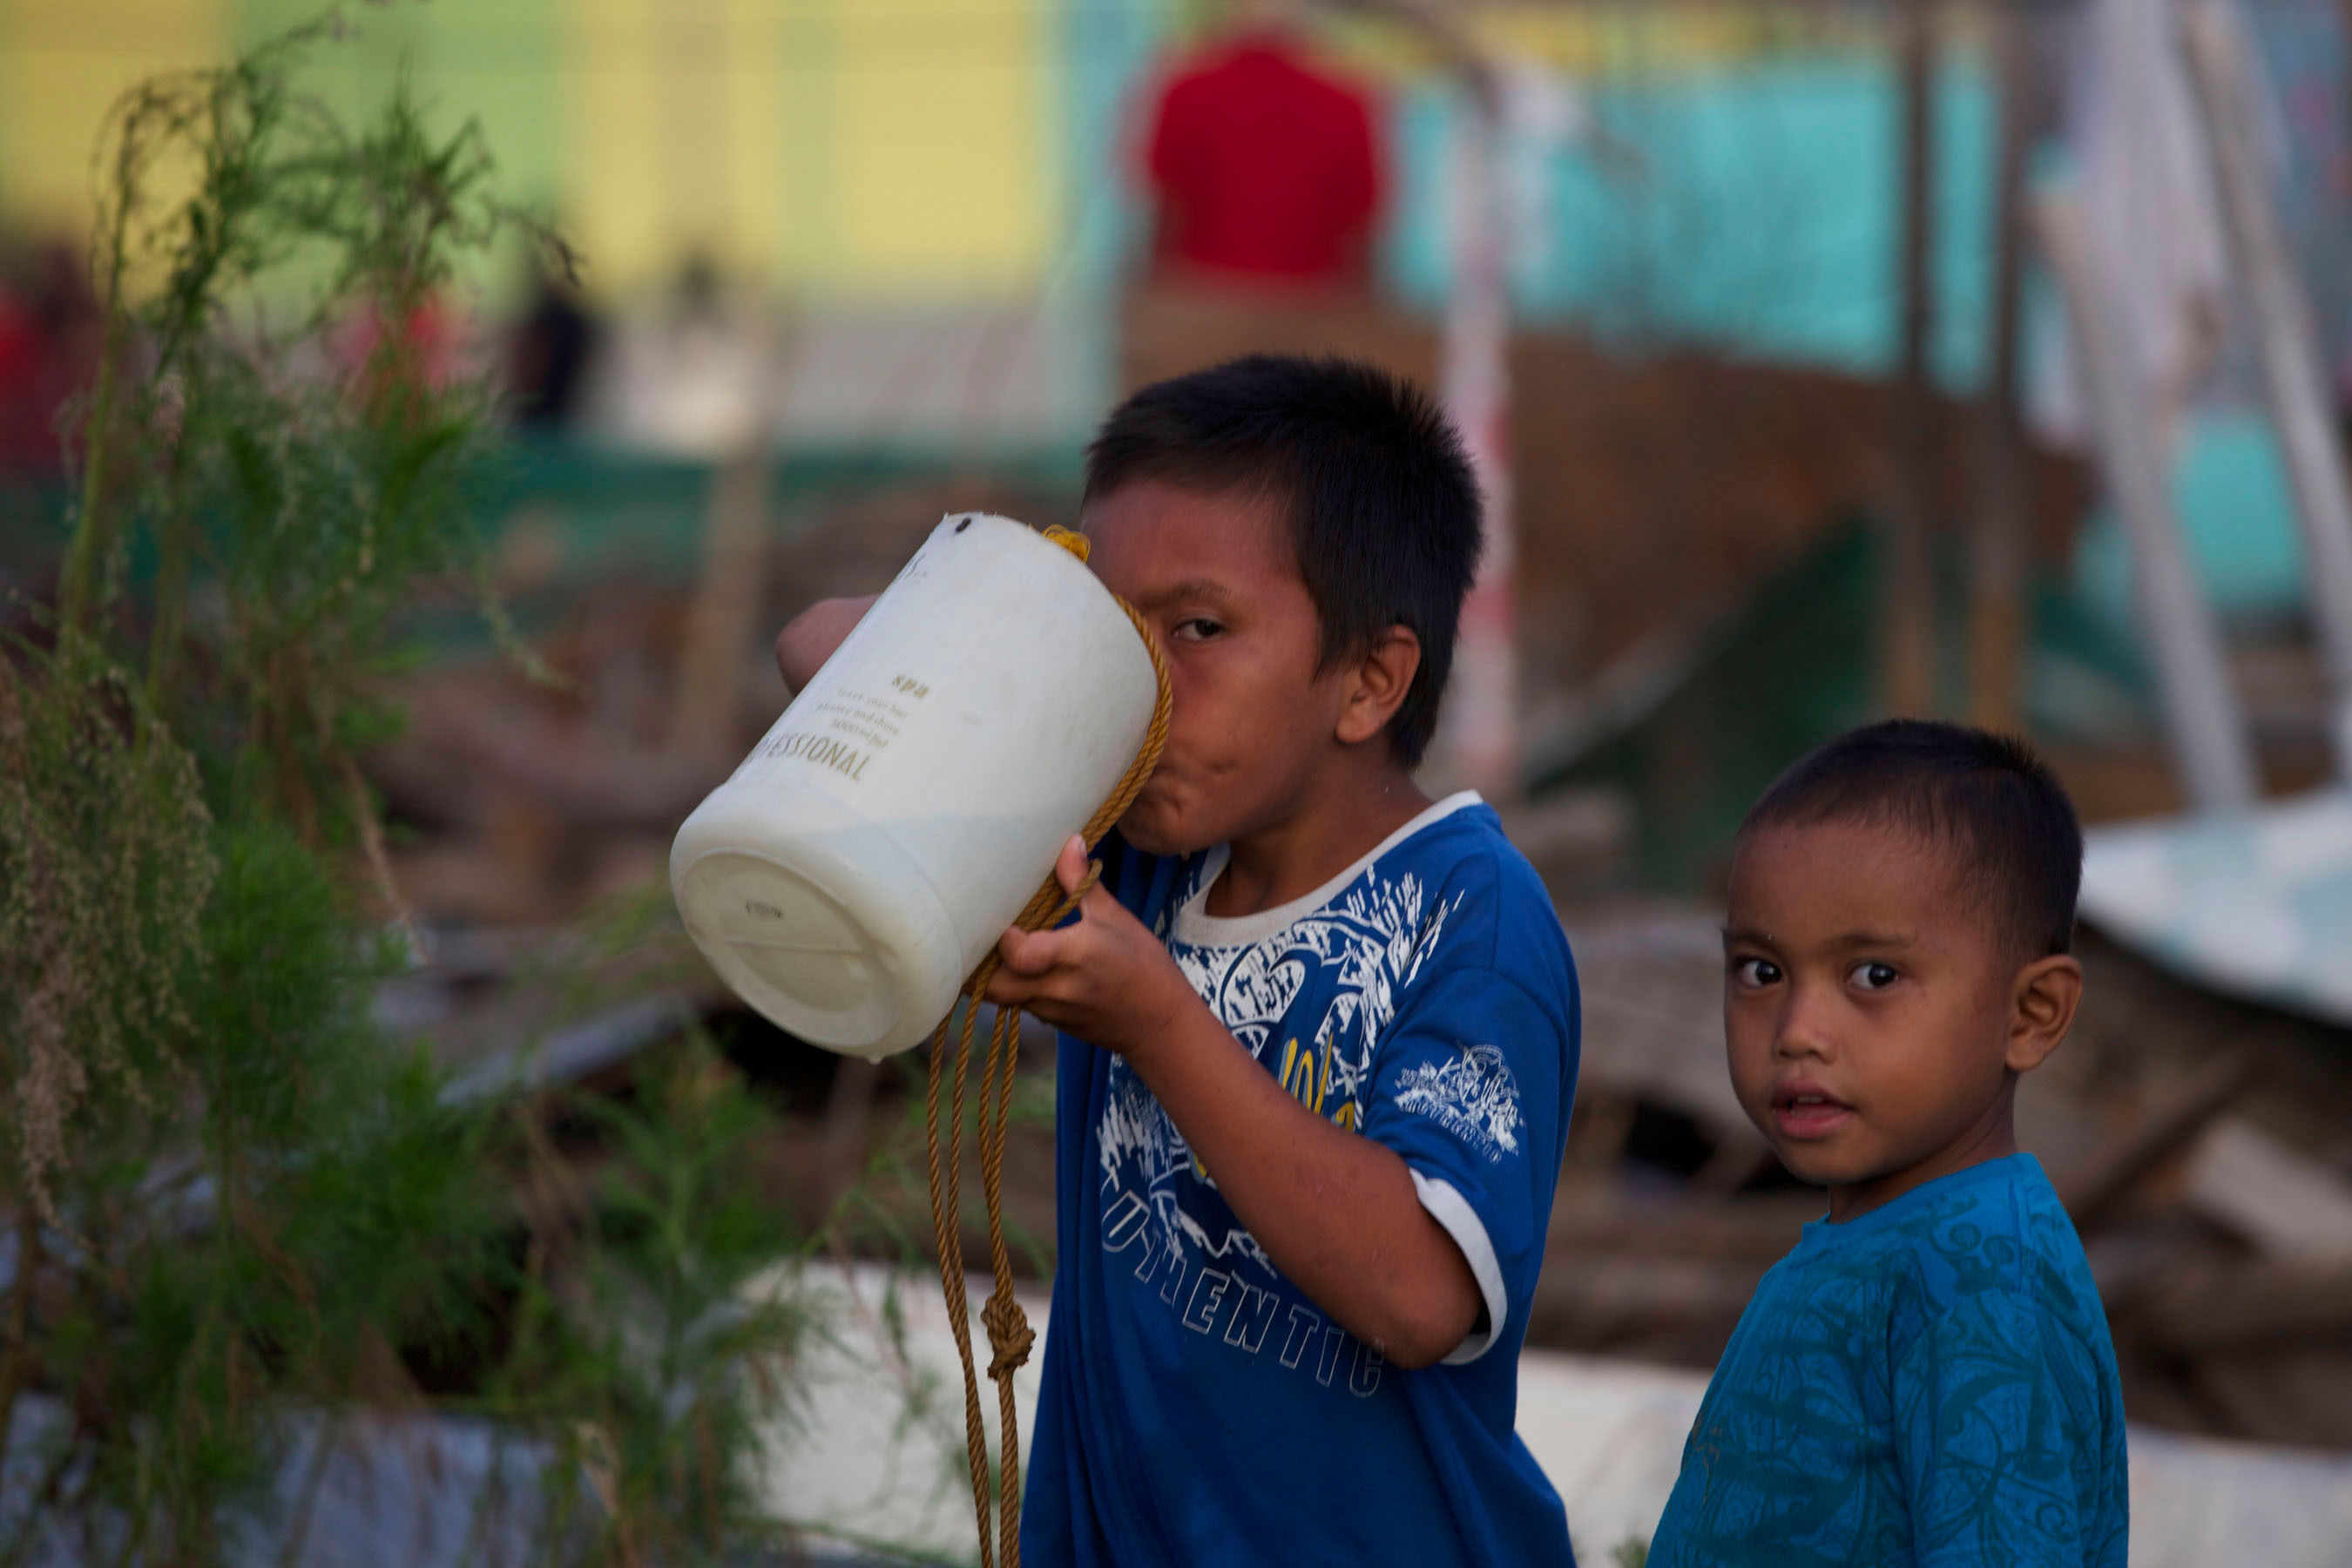 "Water-borne diseases threaten to claim far more lives in the Philippines than Typhoon Haiyan," said Water Missions International co-founder/CEO George Greene III P.E., Ph.D. (PRNewsFoto/Water Missions International) (PRNewsFoto/WATER MISSIONS INTERNATIONAL)